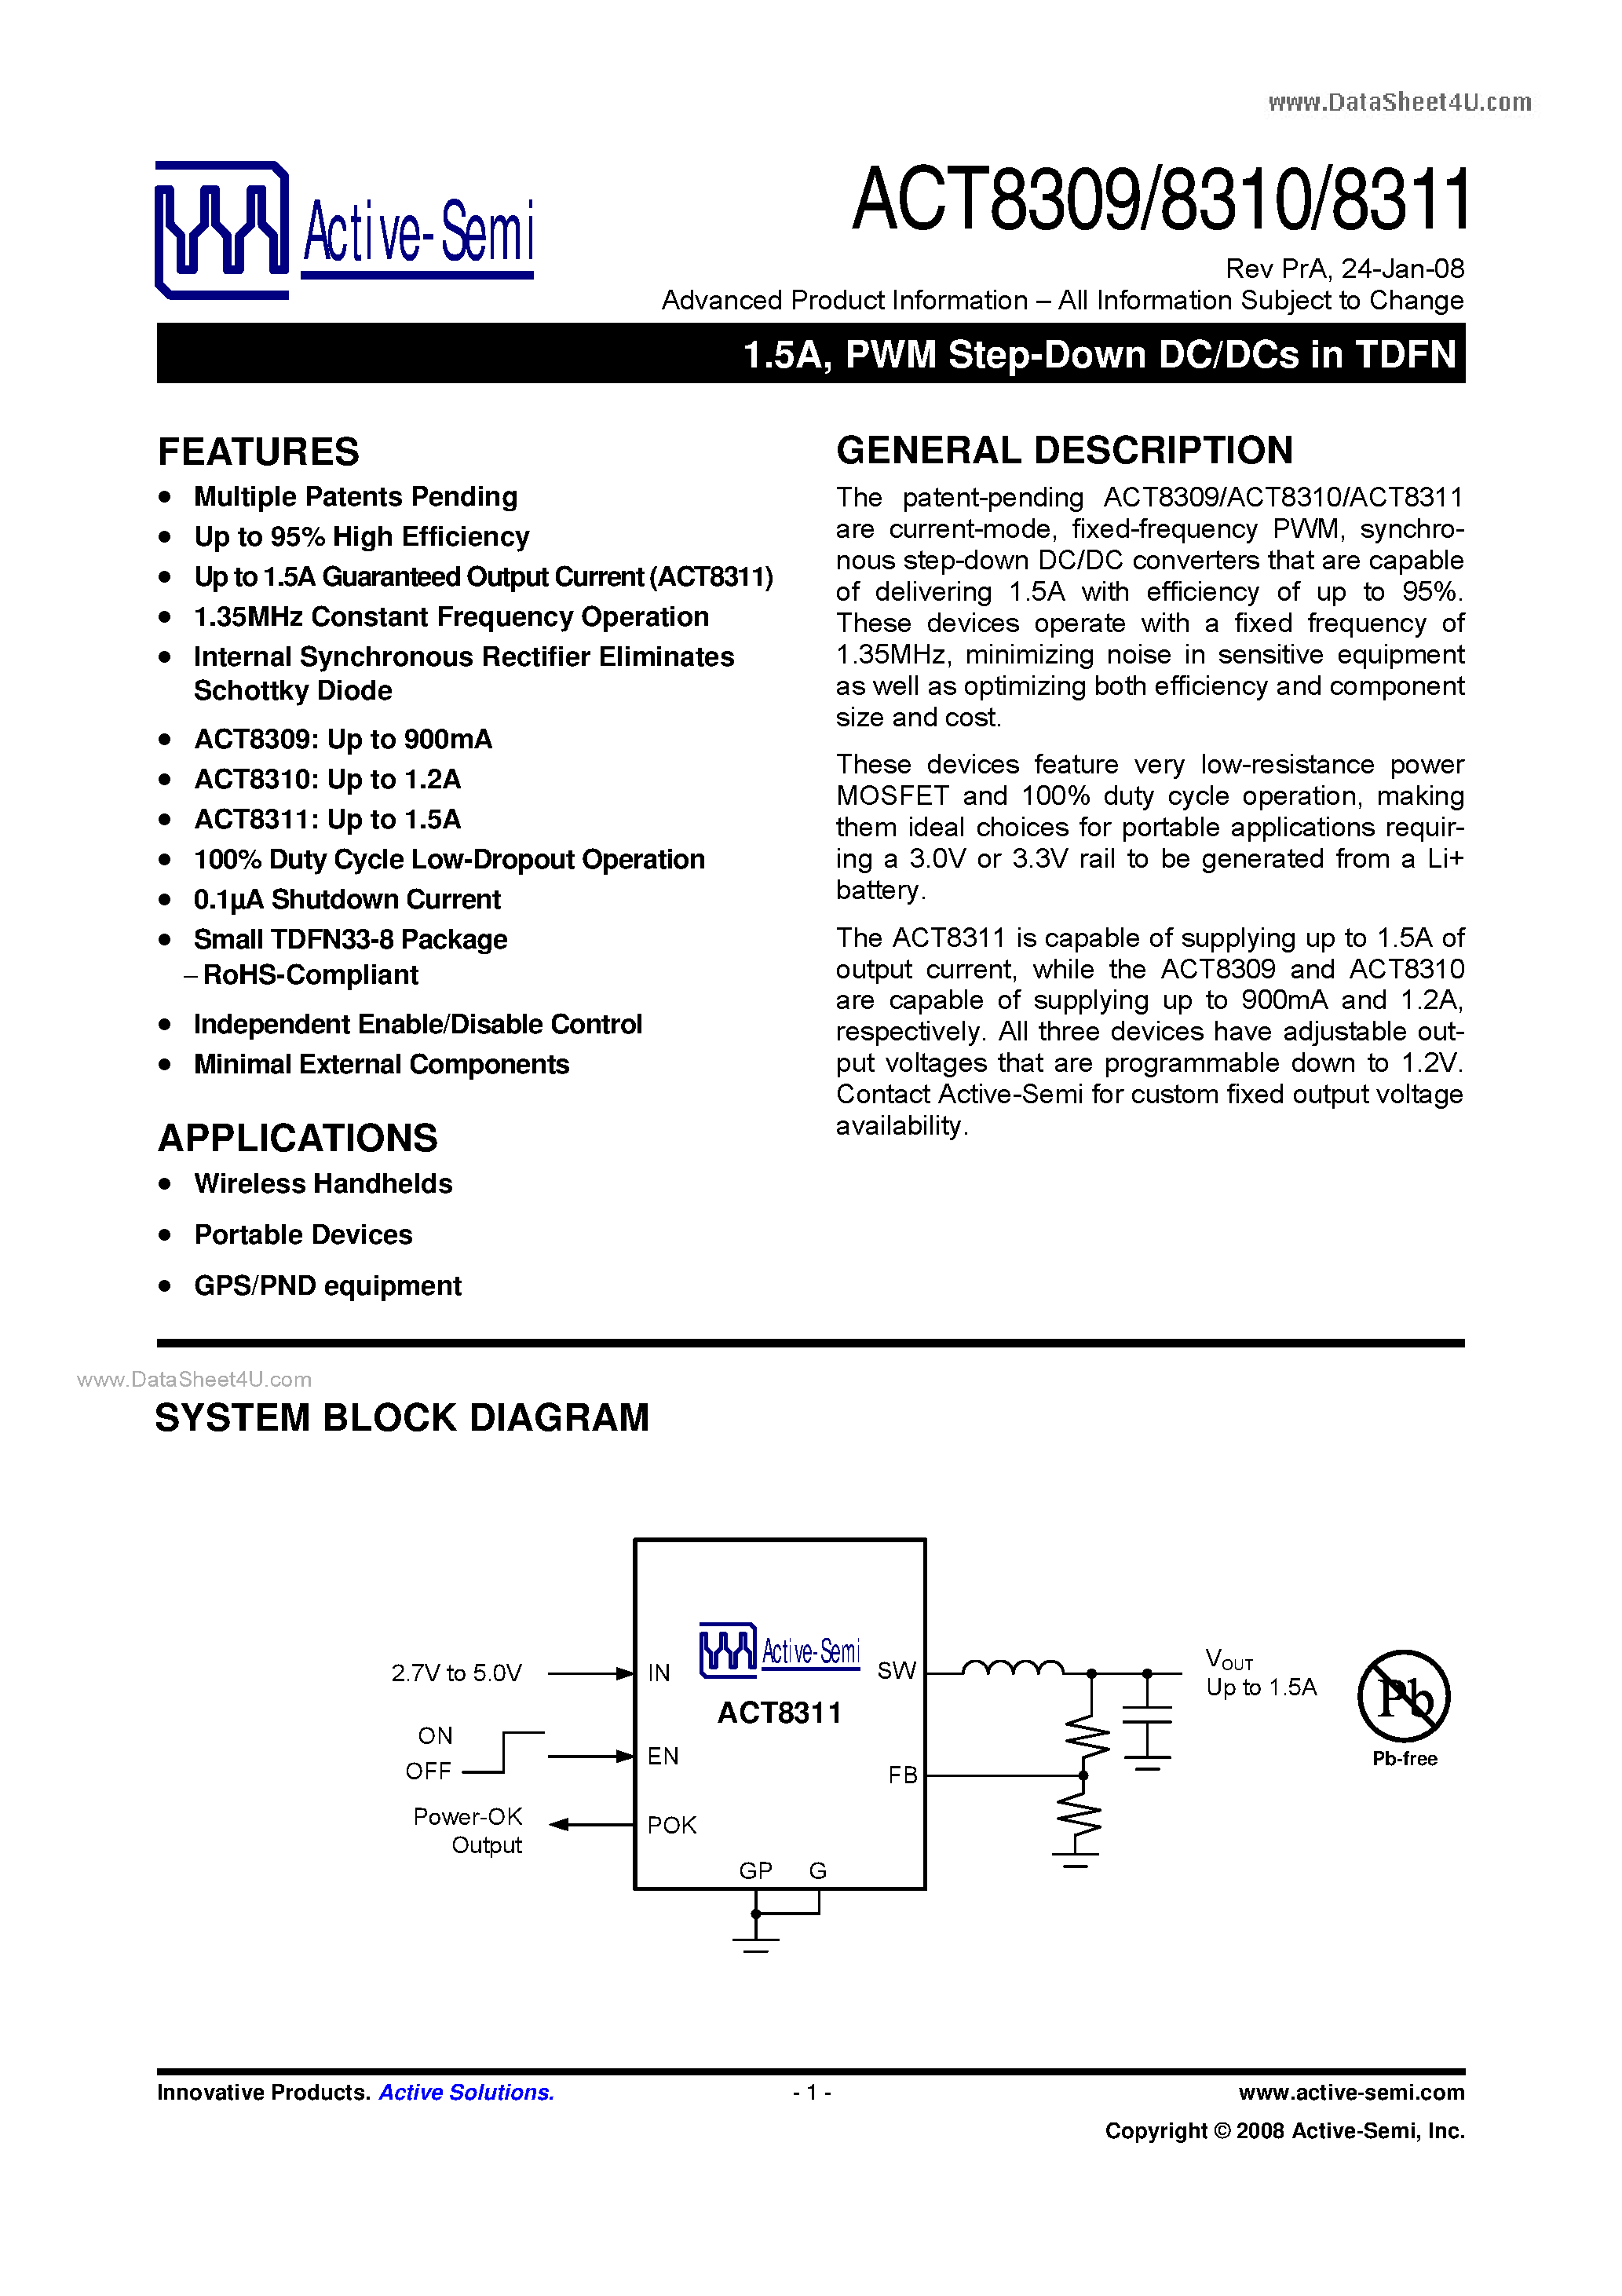 Datasheet ACT8310 - (ACT8309 - ACT8311) PWM Step-Down DC/DCs page 1